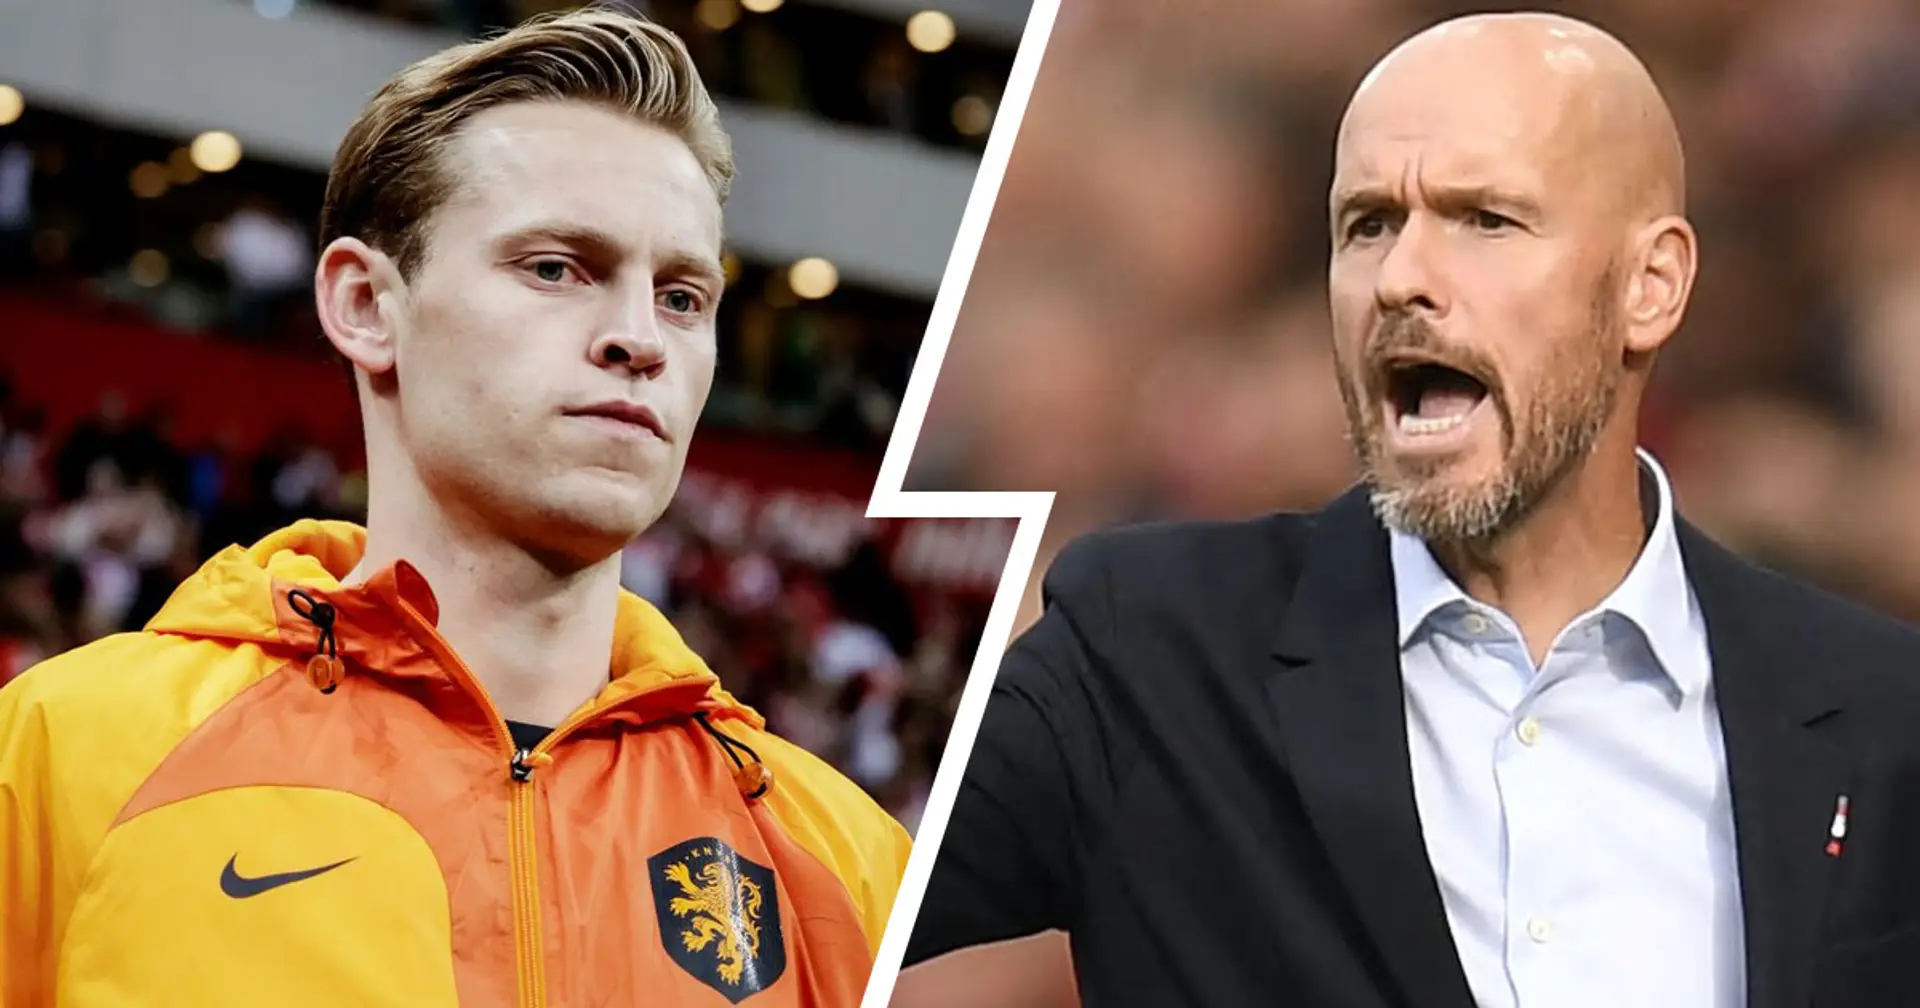 Ten Hag 'couldn't convince' Frenkie de Jong to join him at Man United (reliability: 4 stars)